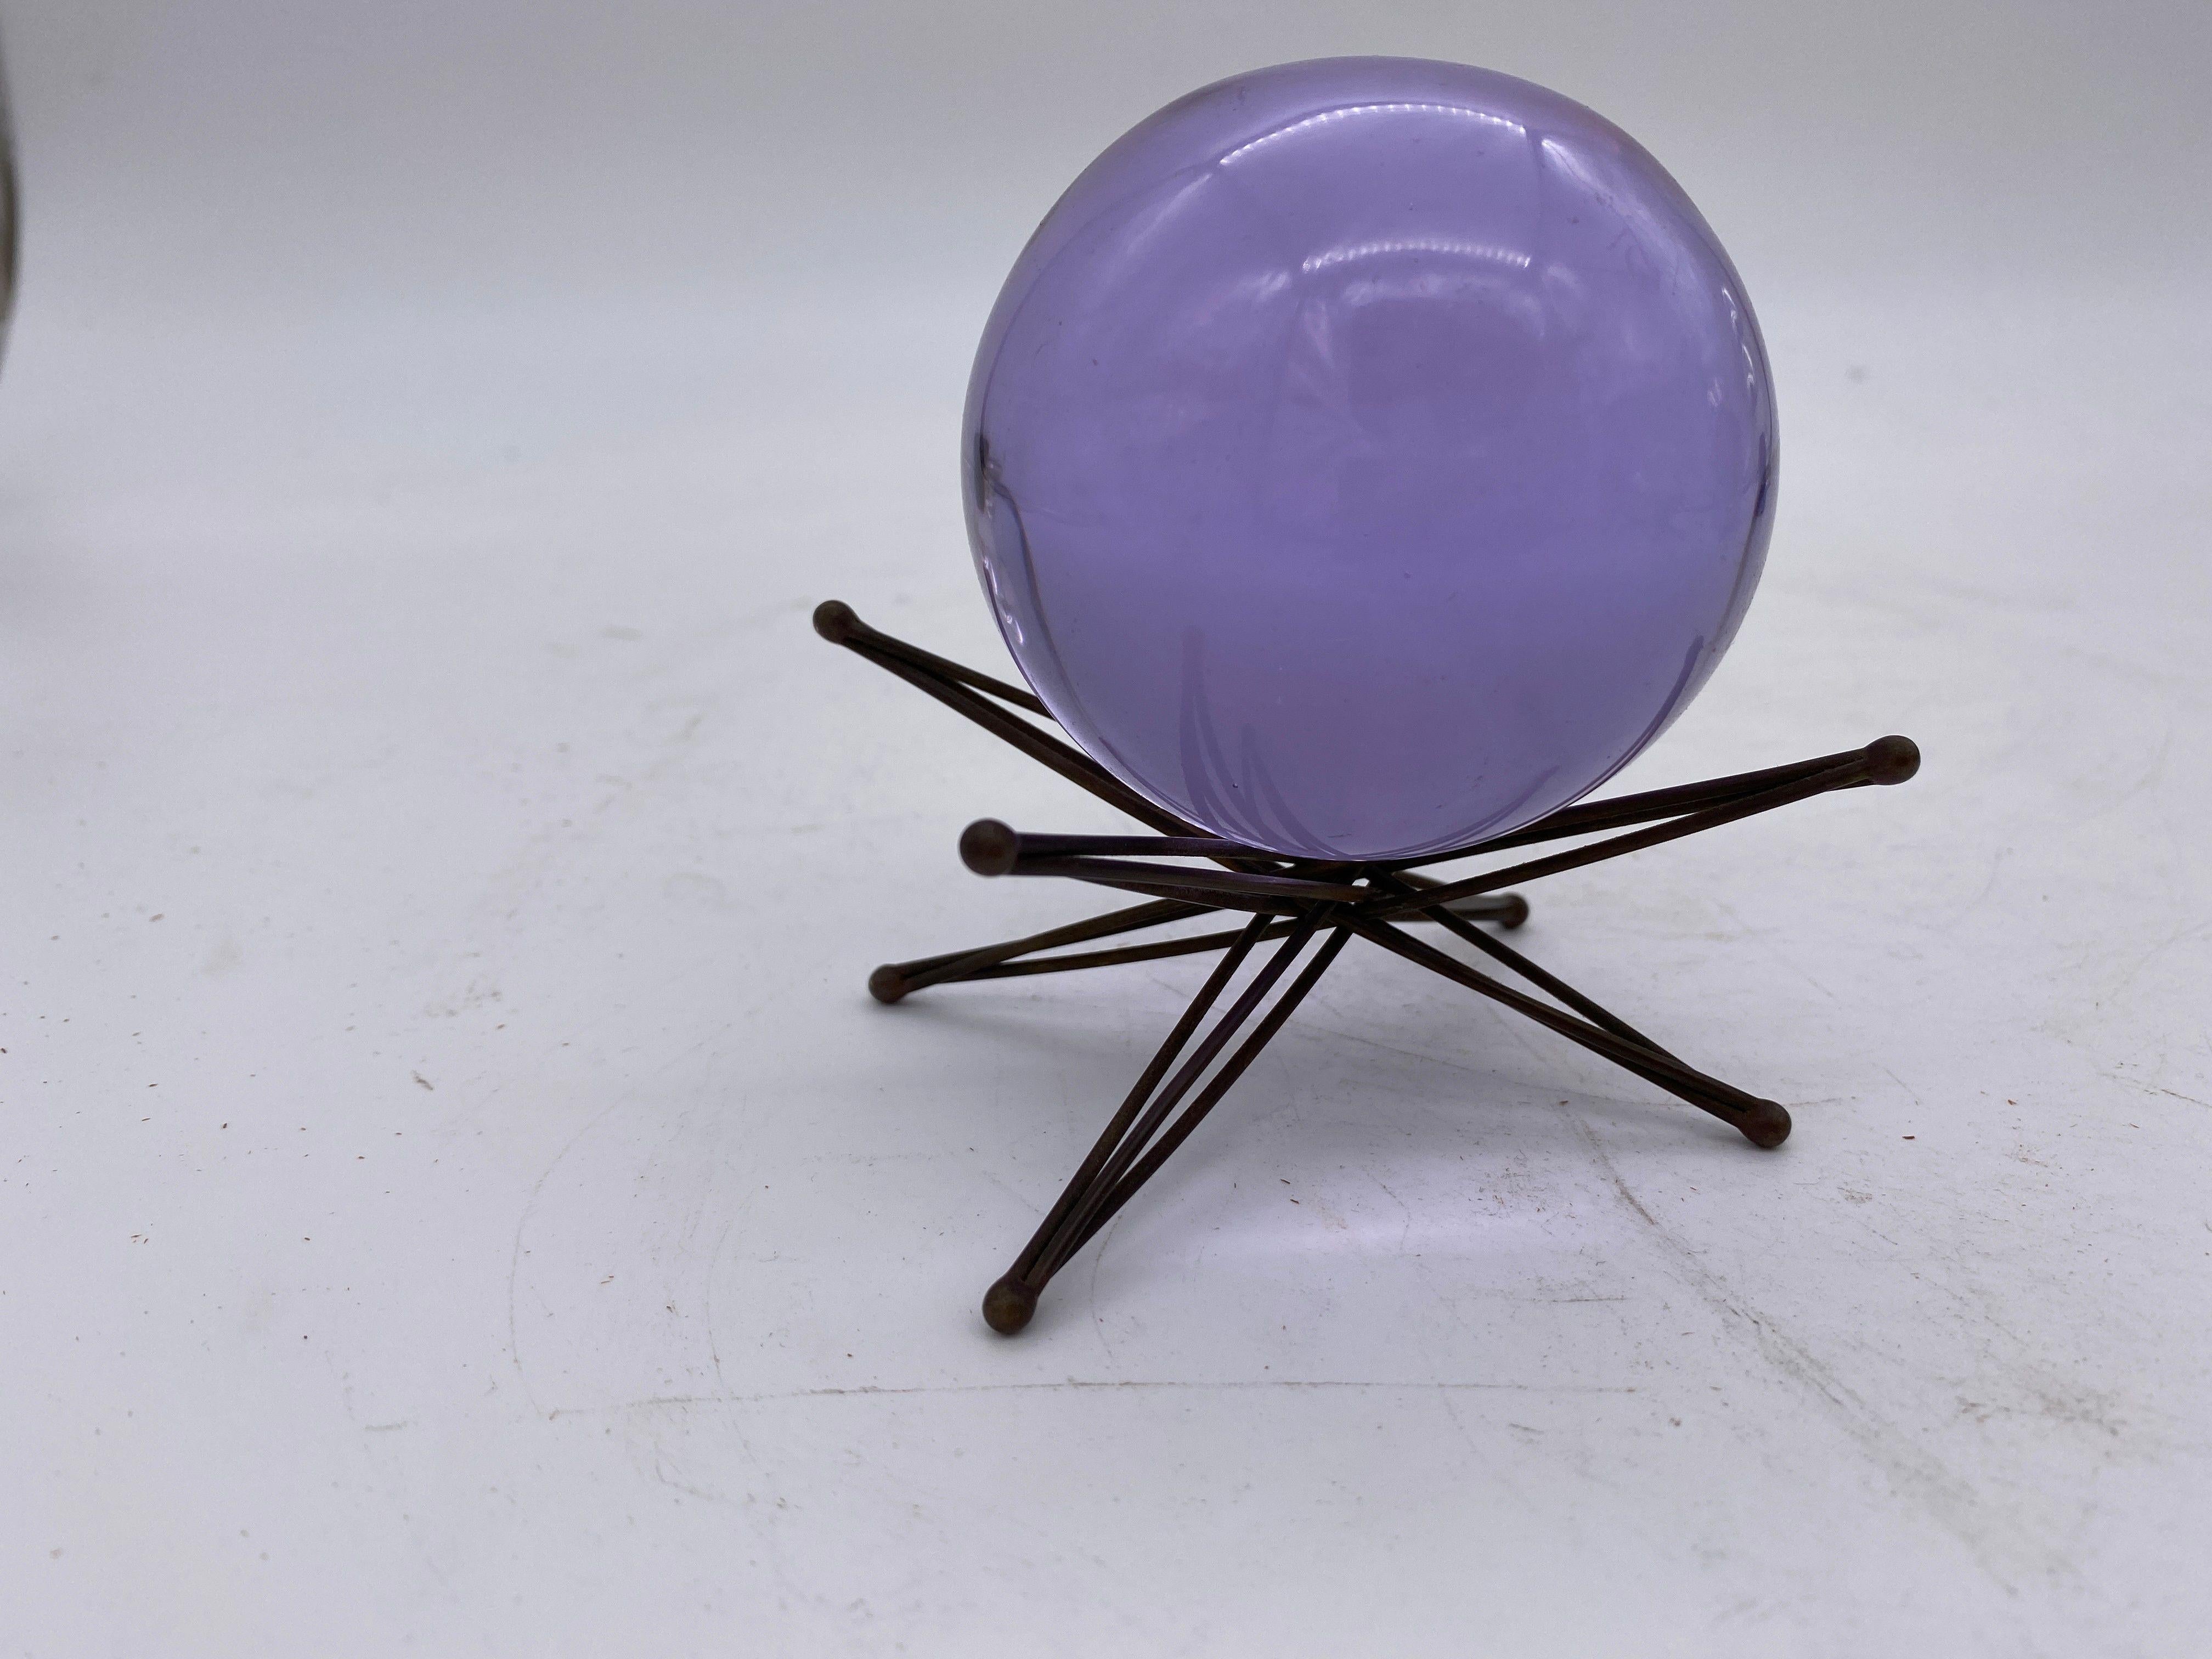 Mercury Glass Sphere with Stands Collection 3